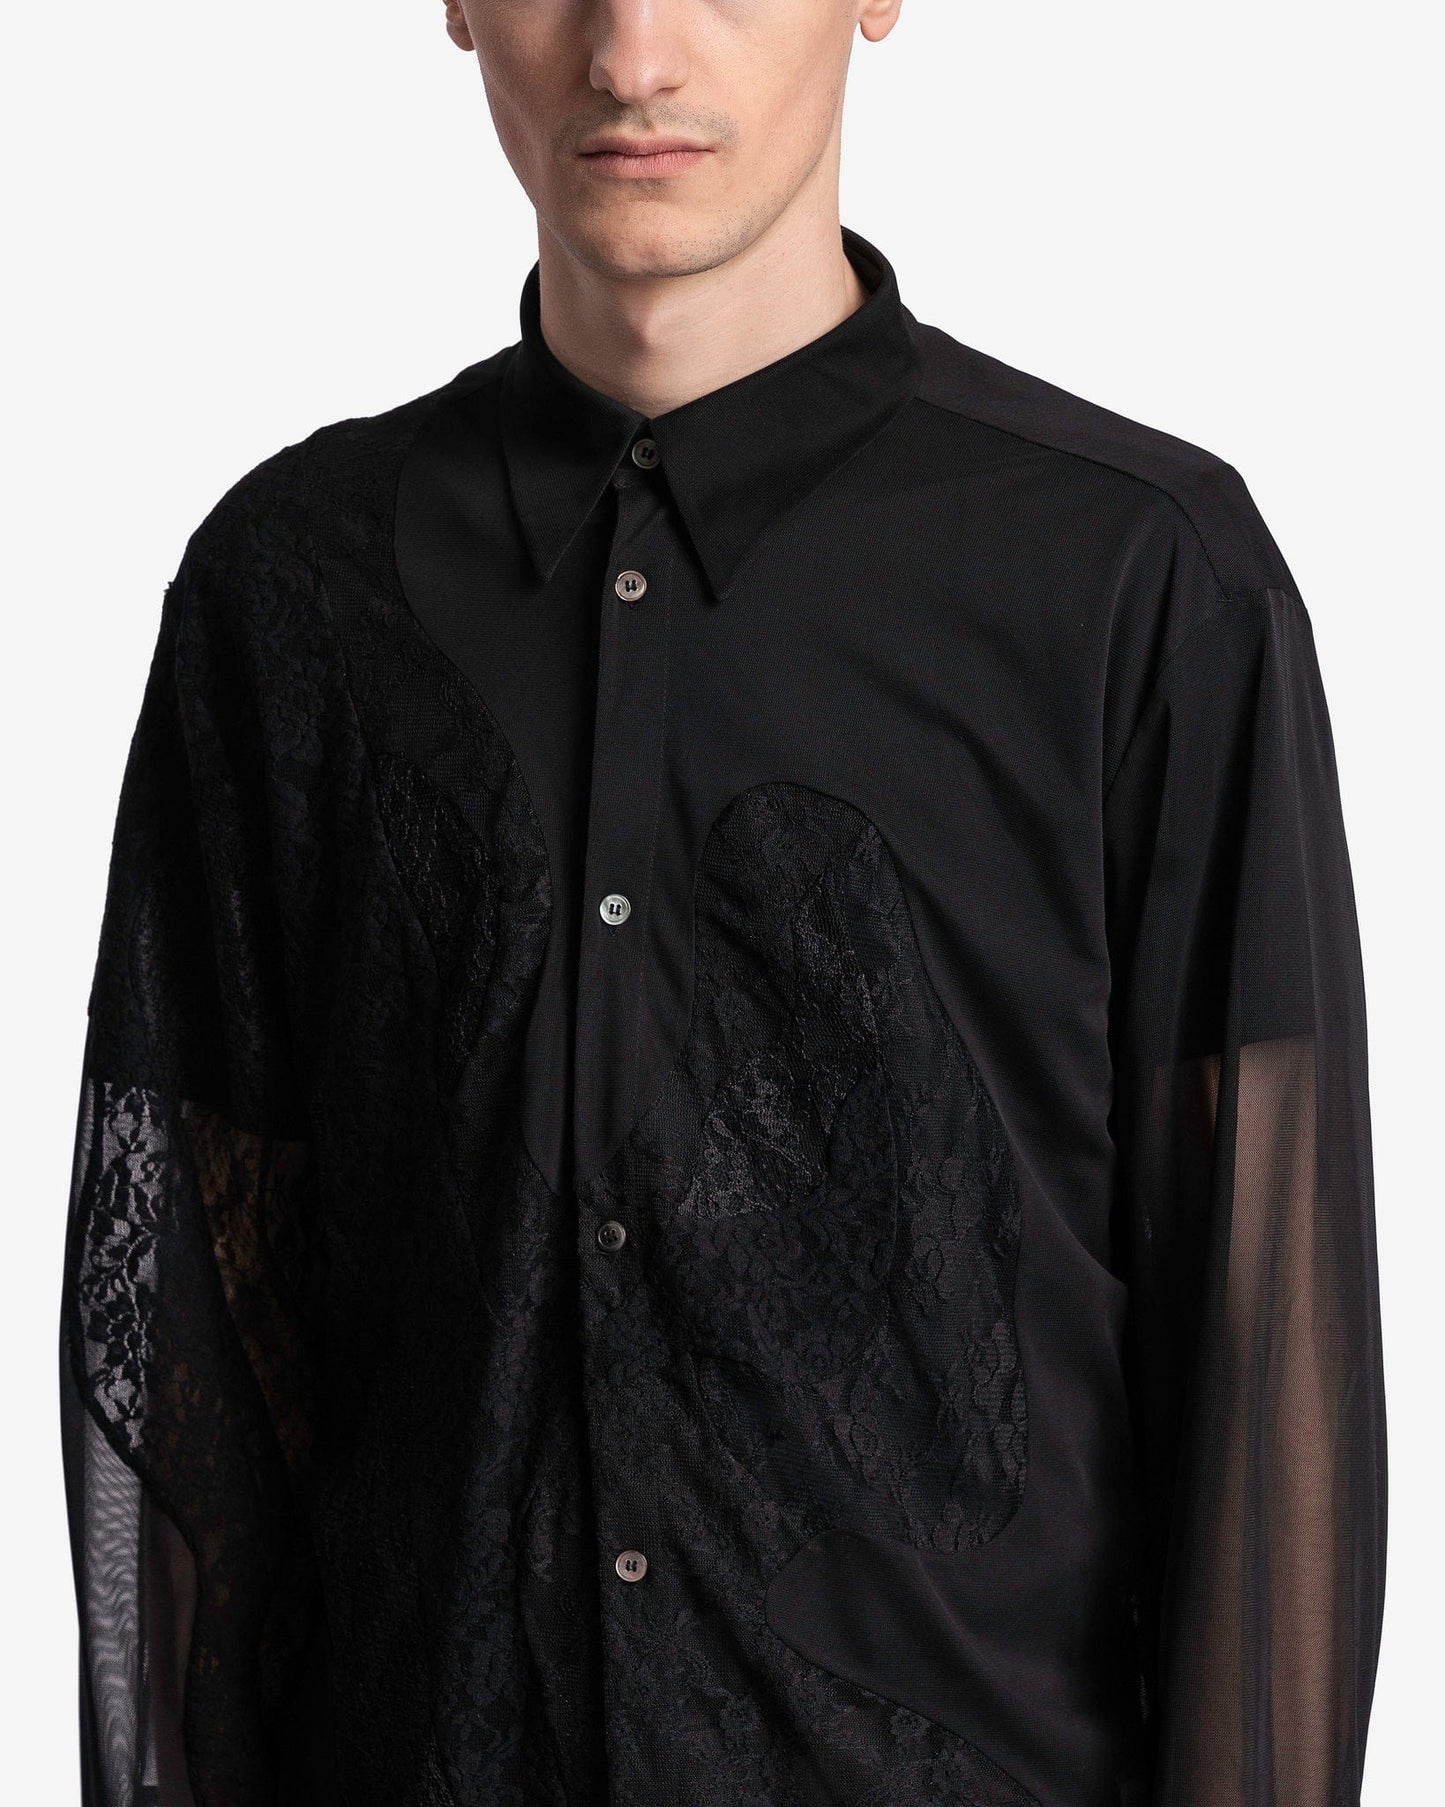 POST ARCHIVE FACTION (P.A.F) Men's Shirts 5.0+ Shirt Left in Black